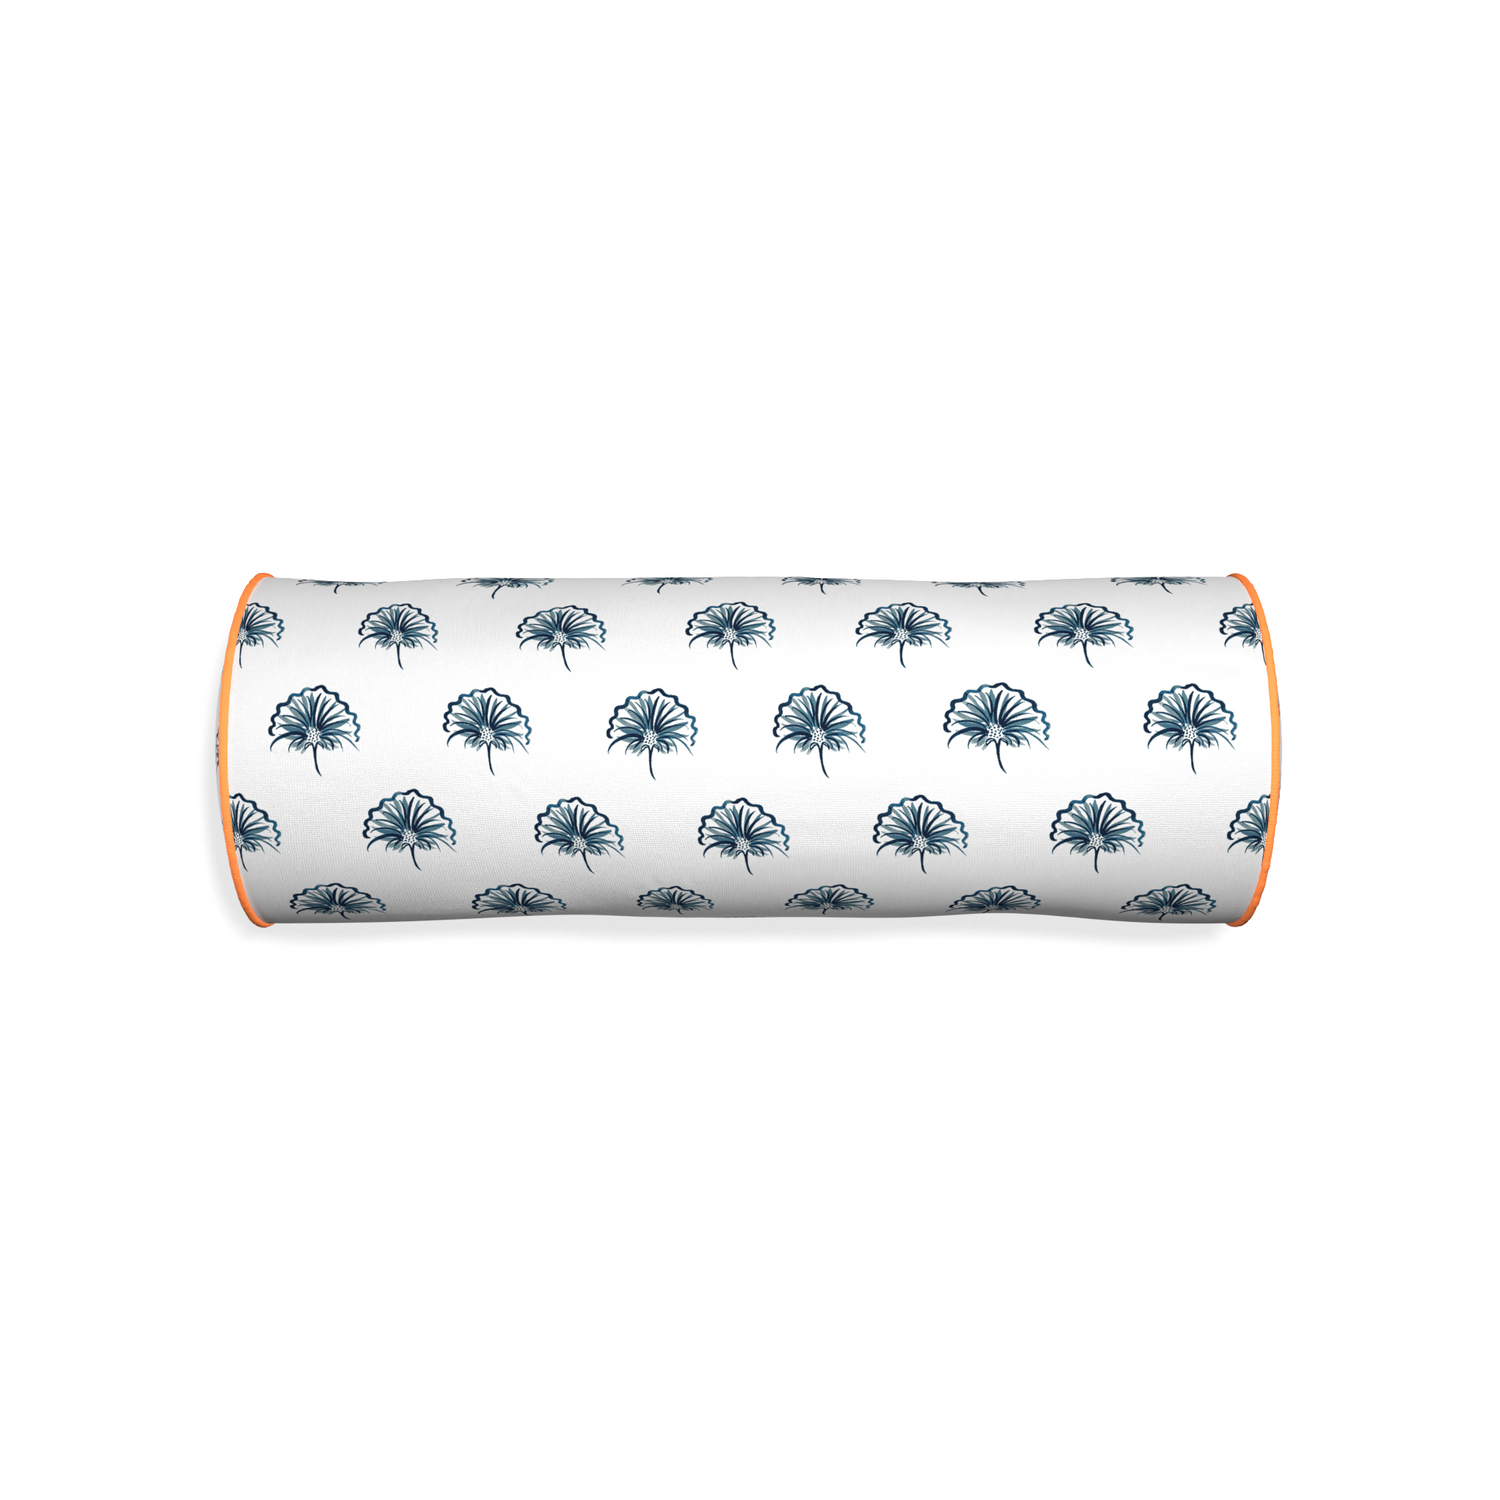 Bolster penelope midnight custom floral navypillow with clementine piping on white background